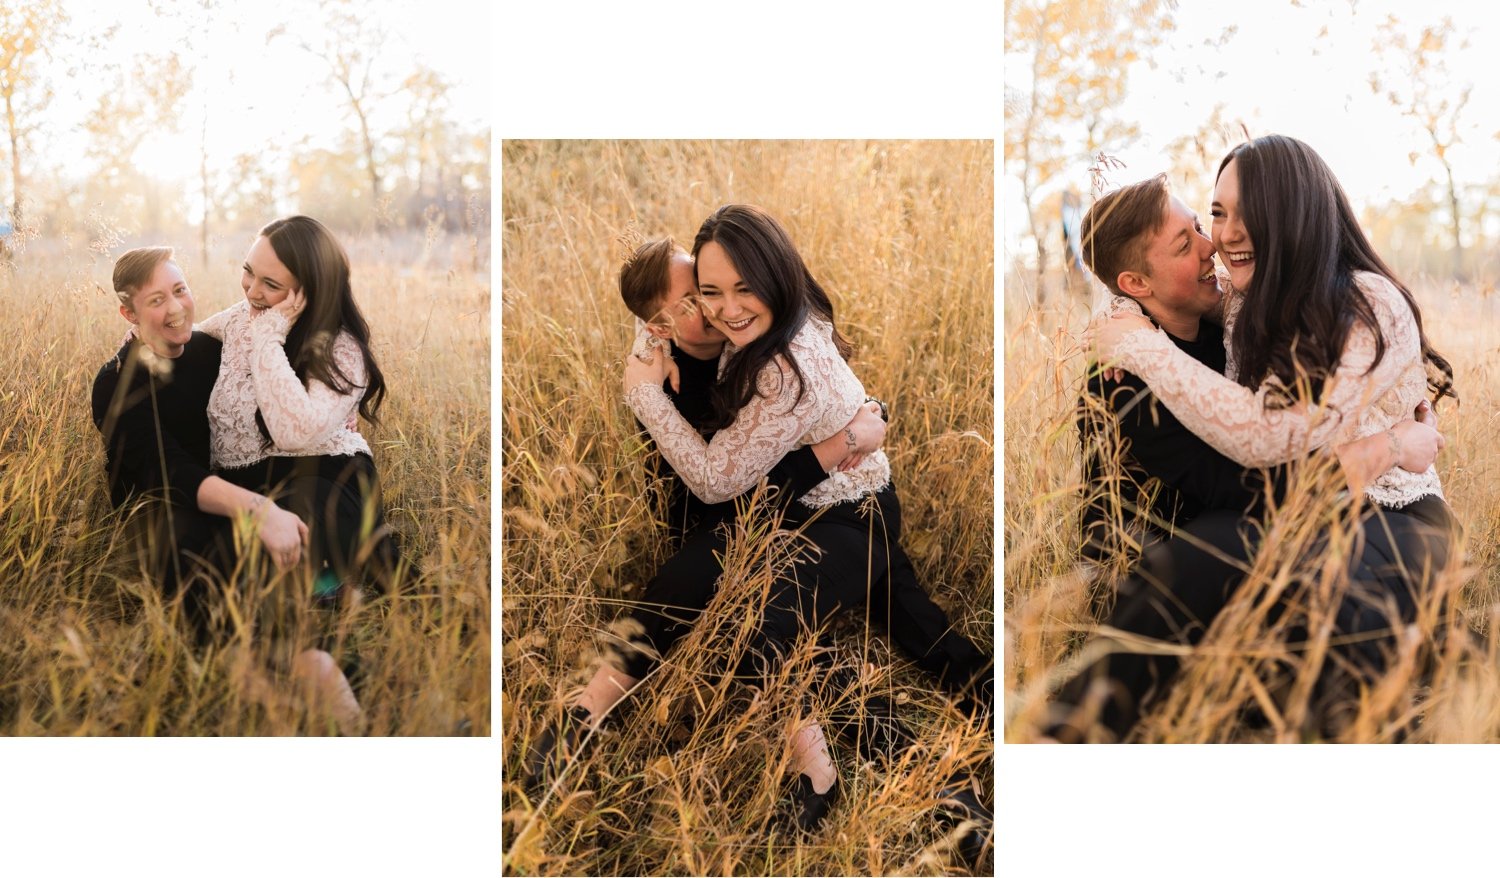 15_2018 29424_2018 29412_2018 29408_sunlight_landscape_trees_couple_engagement_close_Calgary_delicate_cuddle_kiss_golden_nature_intimate_fiancee_autumn_soft_simple_hour_bride_Alberta_photographer_forest_groom_outdoor.jpg